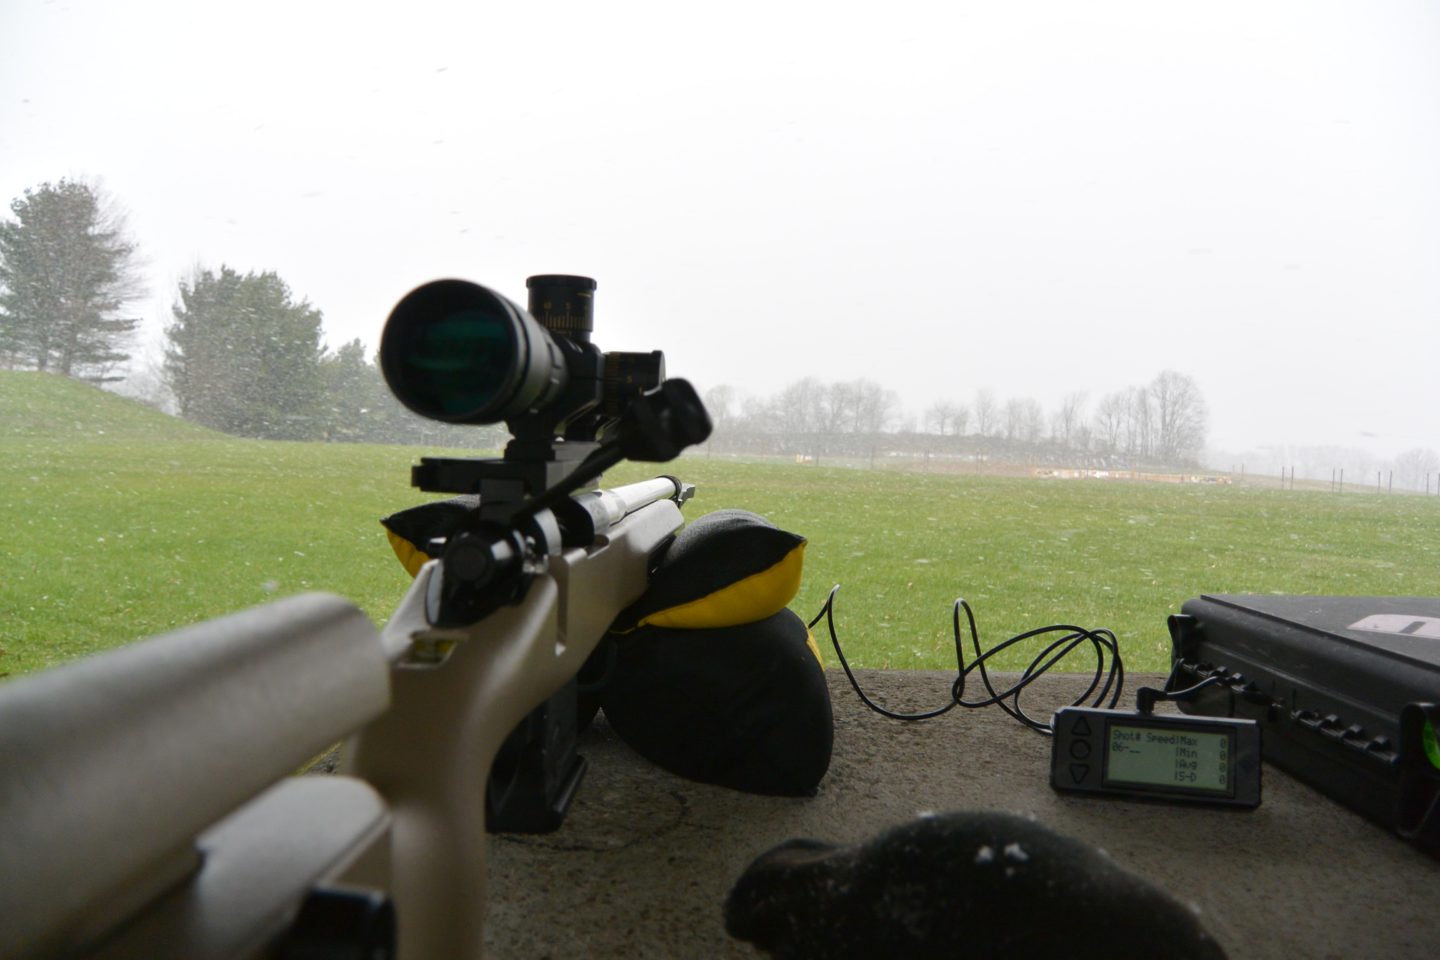 Shooting the Kelby Atlas Tactical in the Grayboe Ridgeback in a blizzard, because it’s spring in Ohio